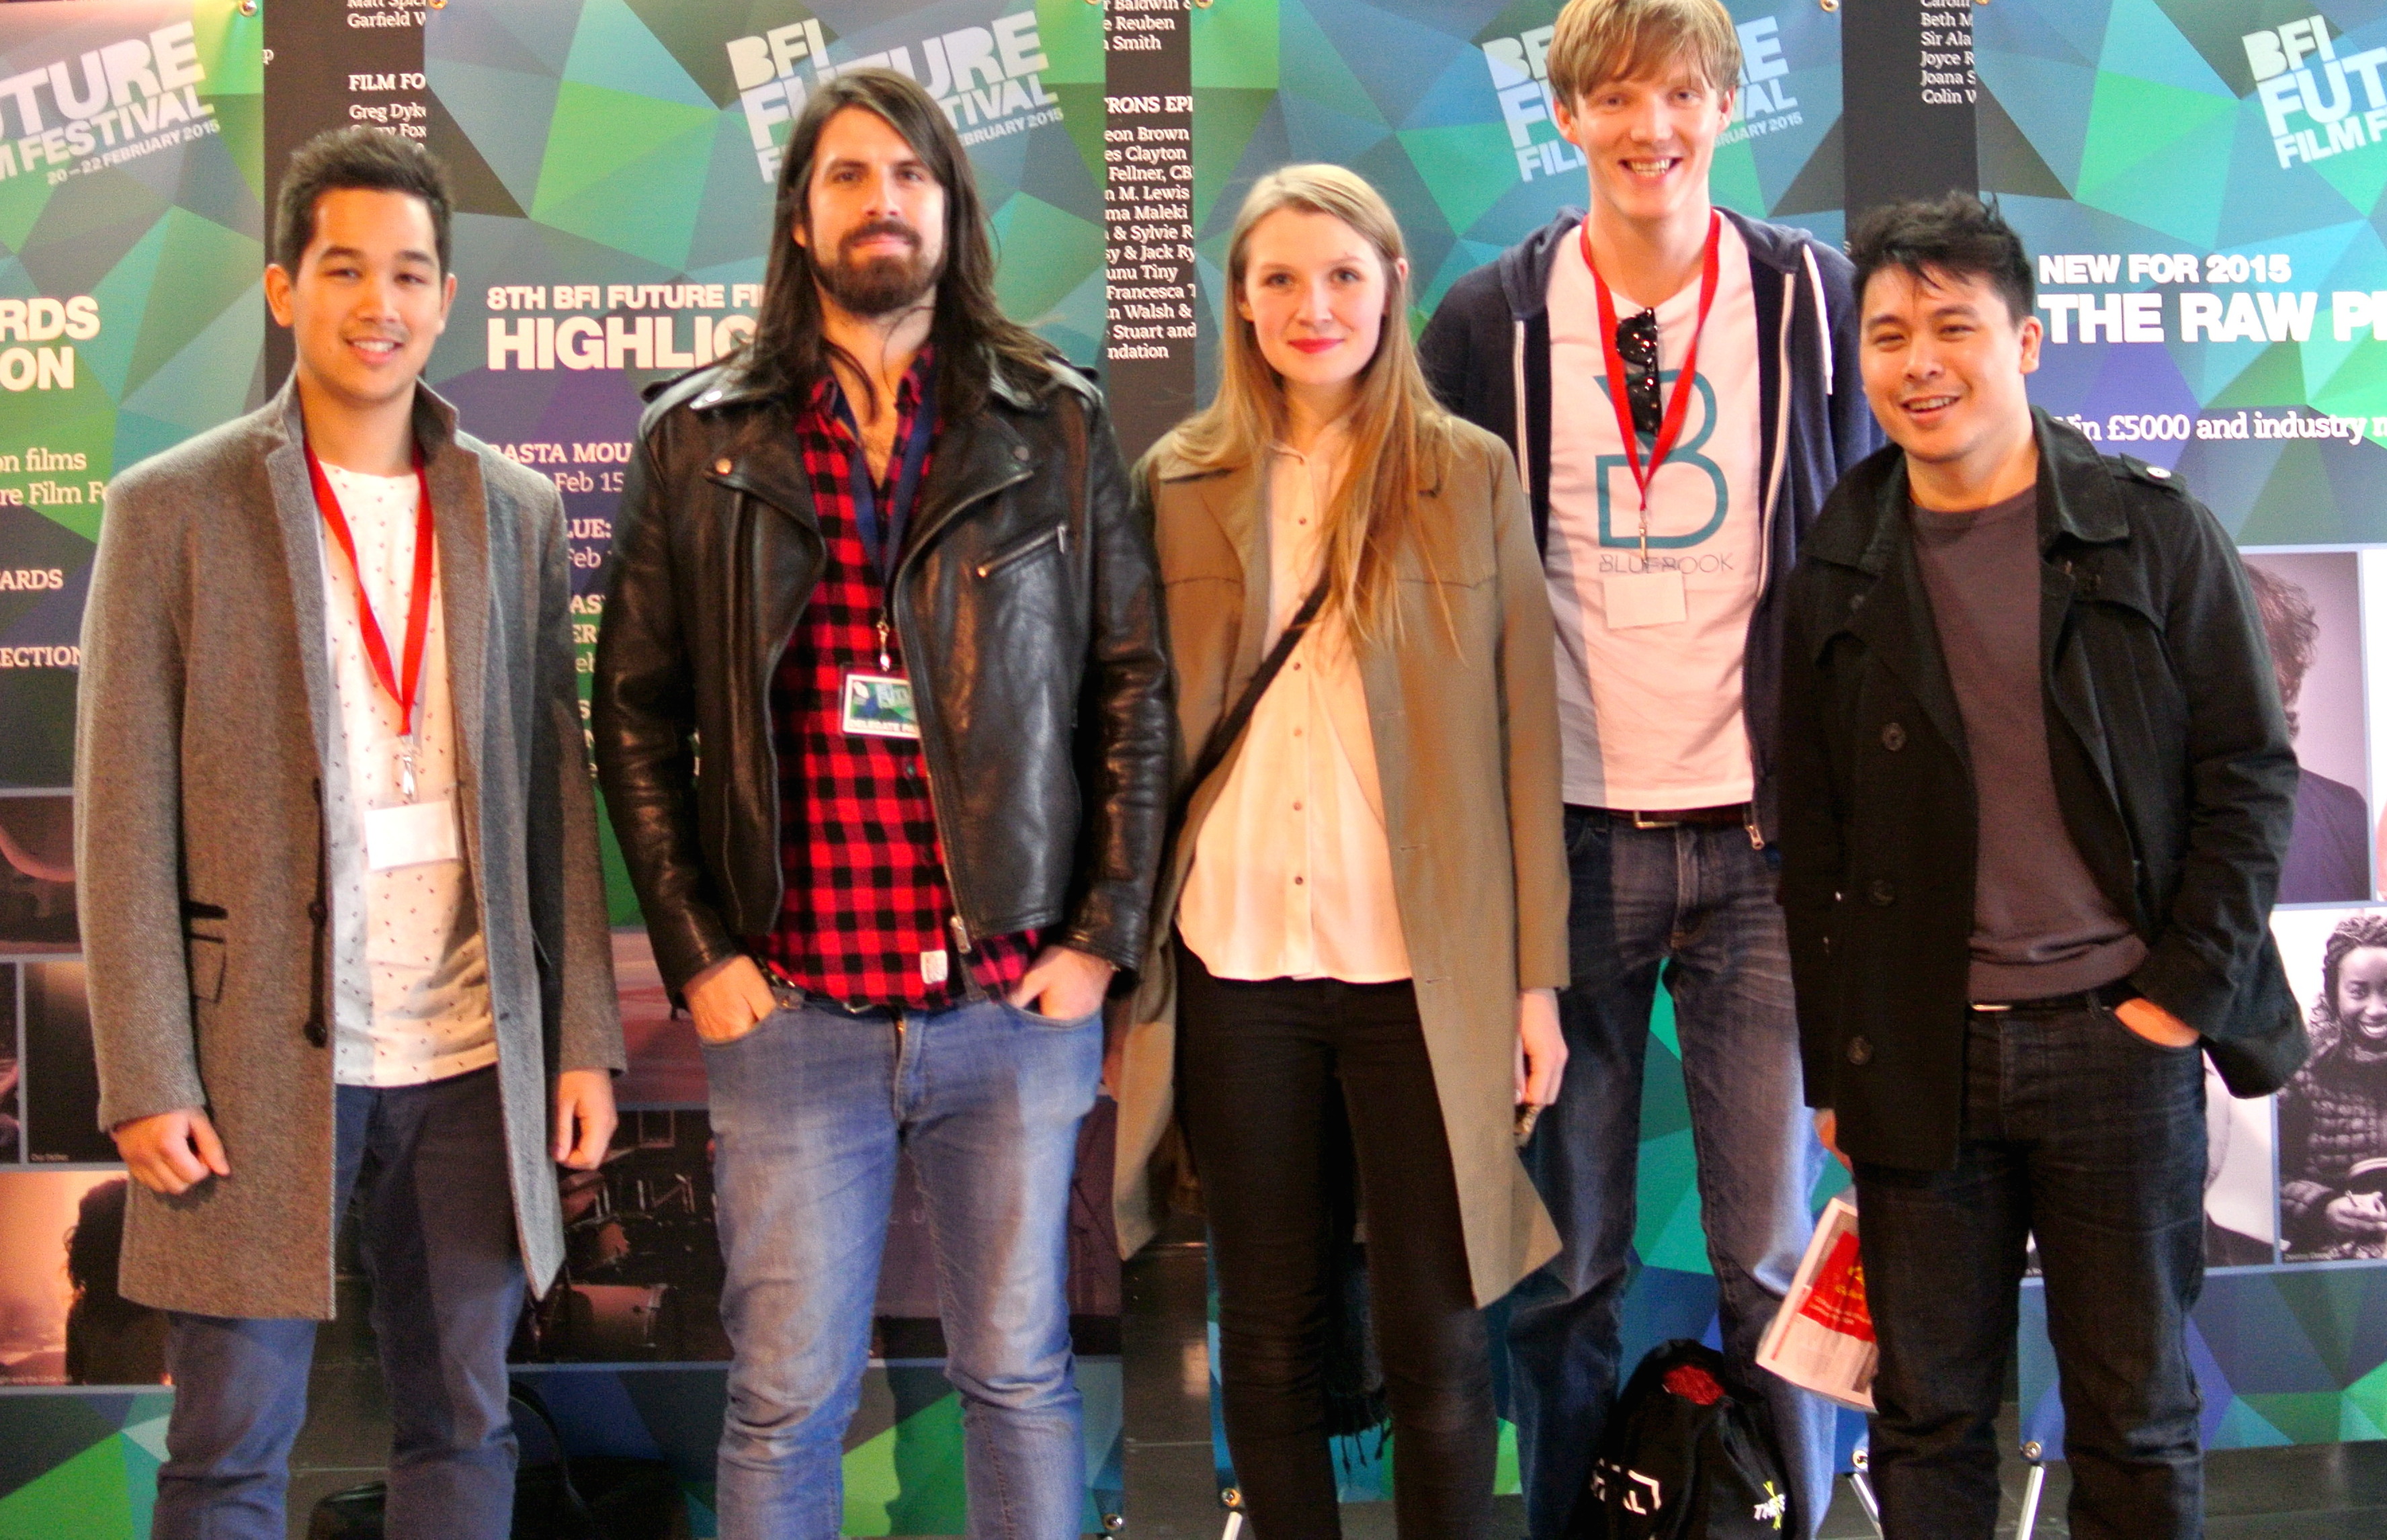 Chris Chung, Andrew Rodger, Stephanie Lewis, Mat Hill and Adrian Chiu at the BFI Future Film Festival.